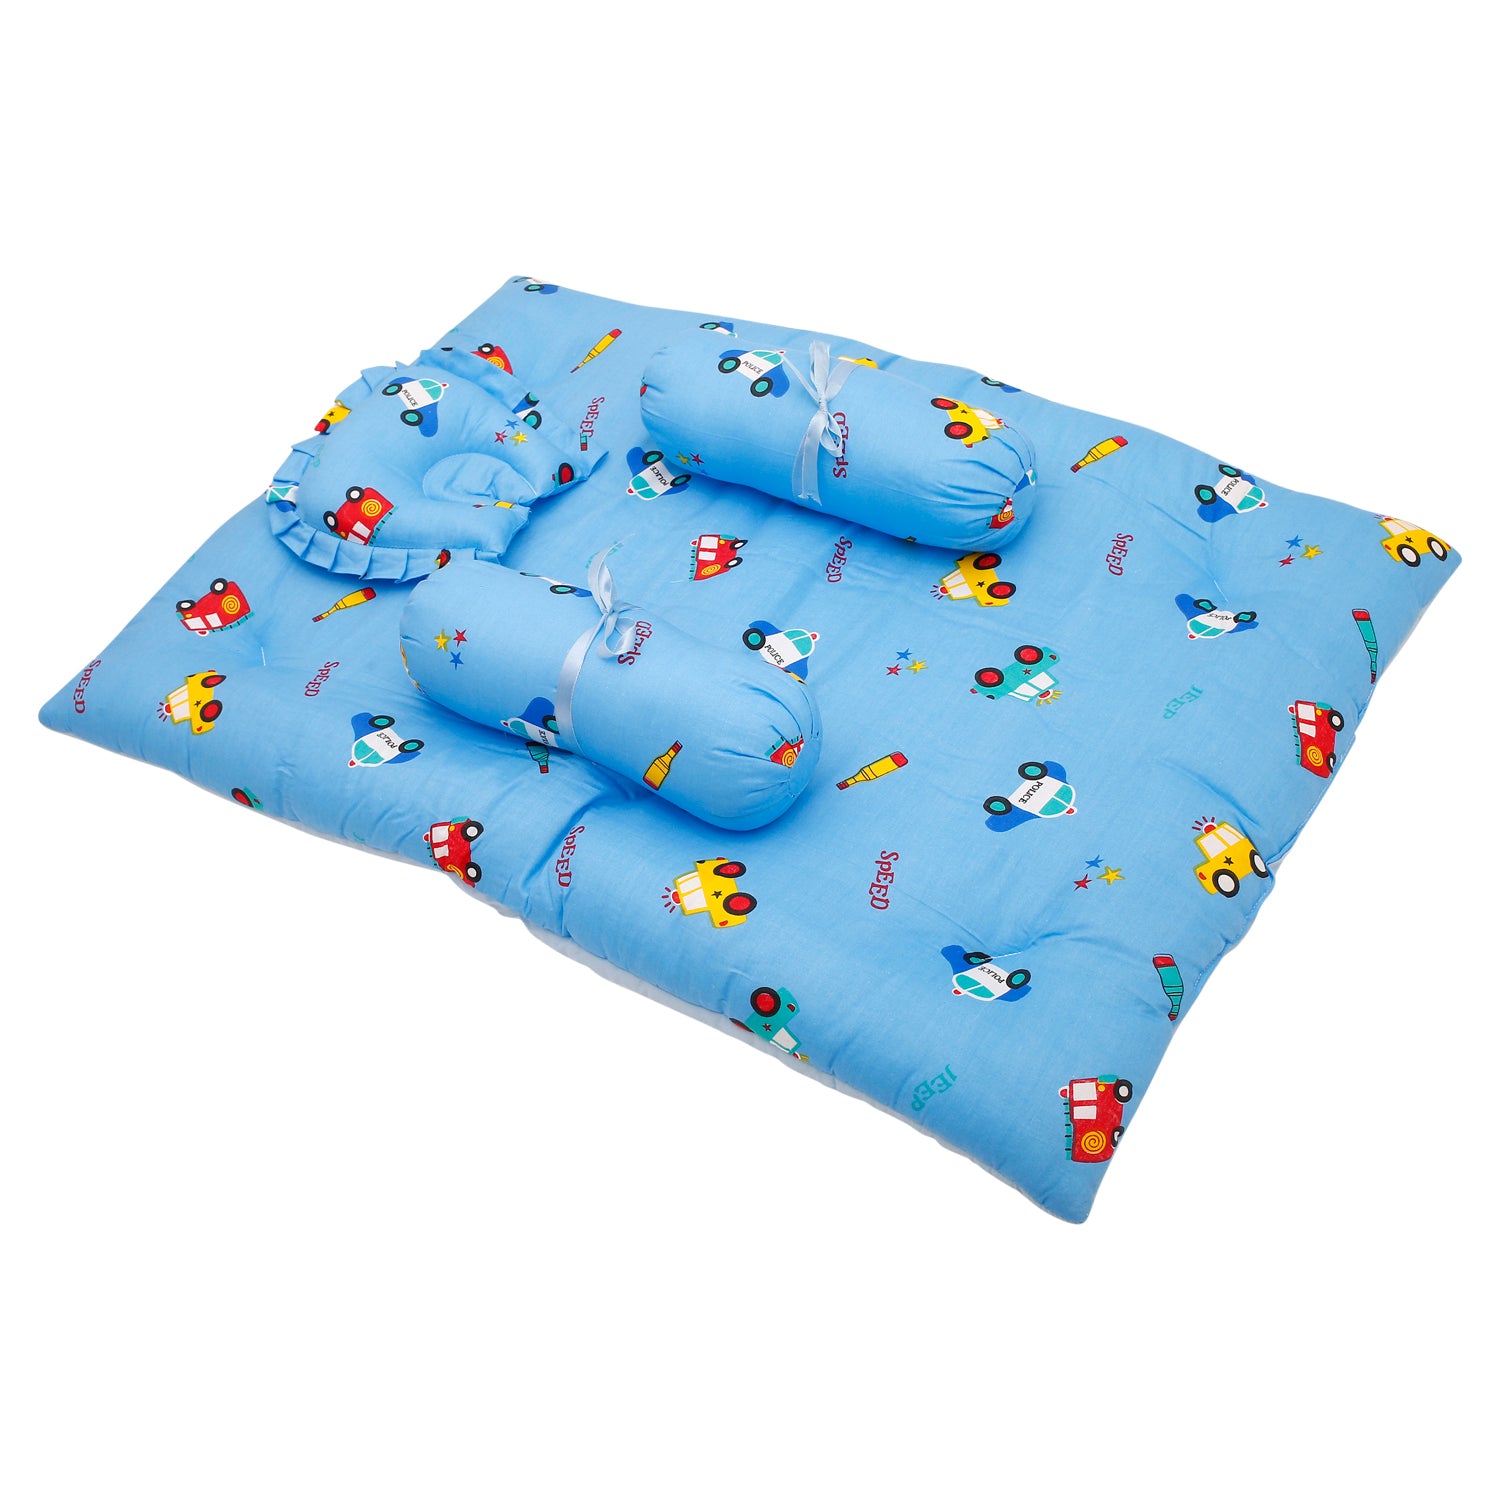 Mattress Set With Neck Pillow and Bolsters Catch Me If You Can Blue - Baby Moo